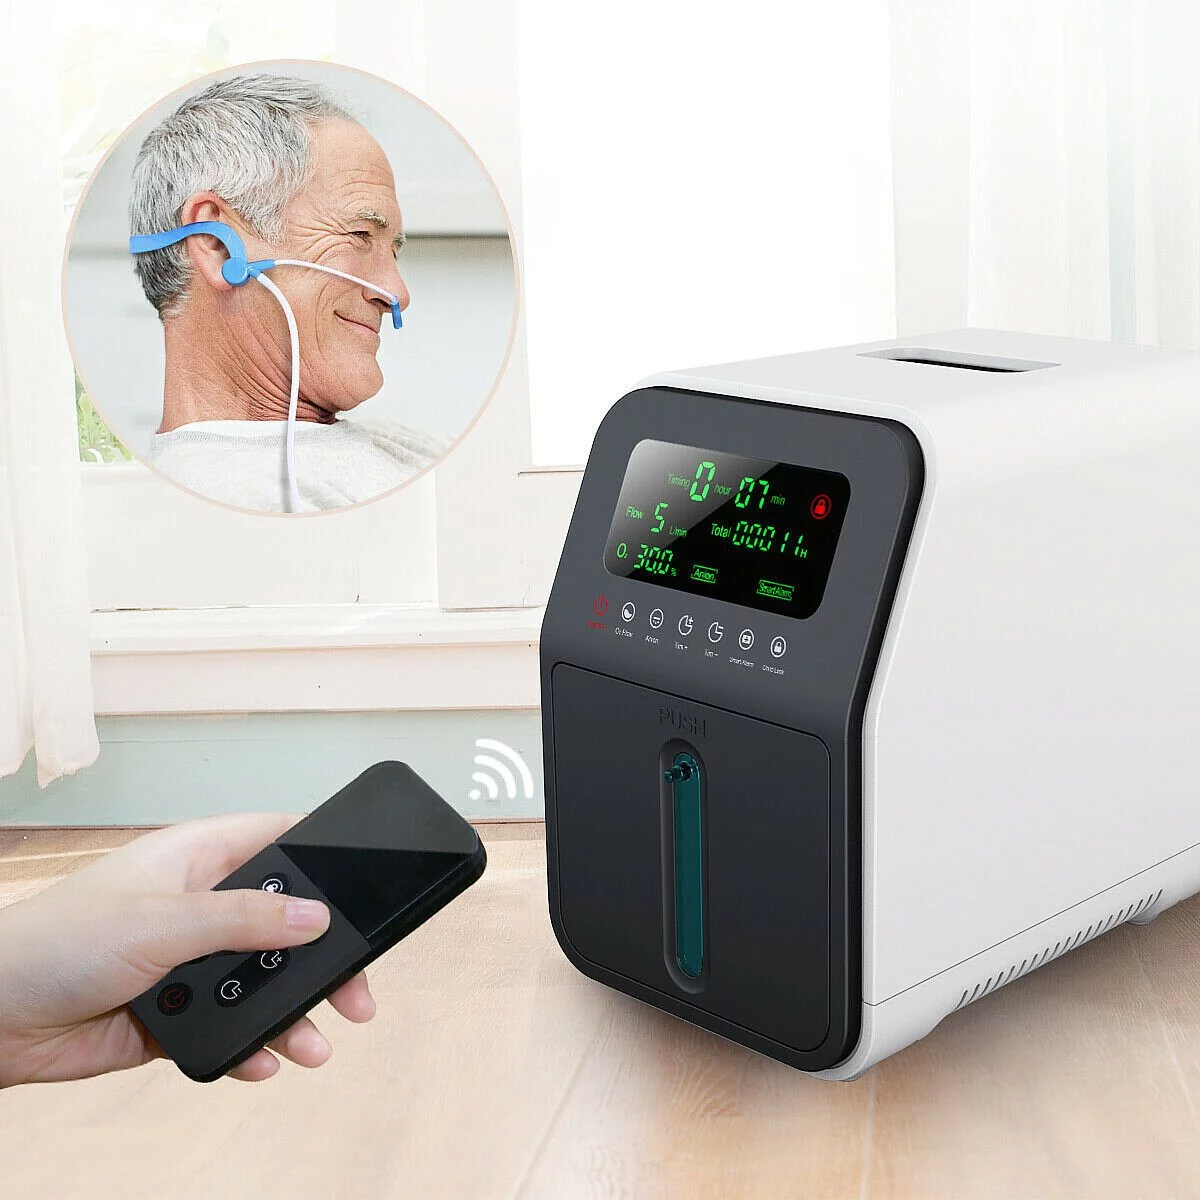 SKY608 1-7L/min Portable Home Oxygen Concentrator Adjustable Oxygen Generator for Home Use